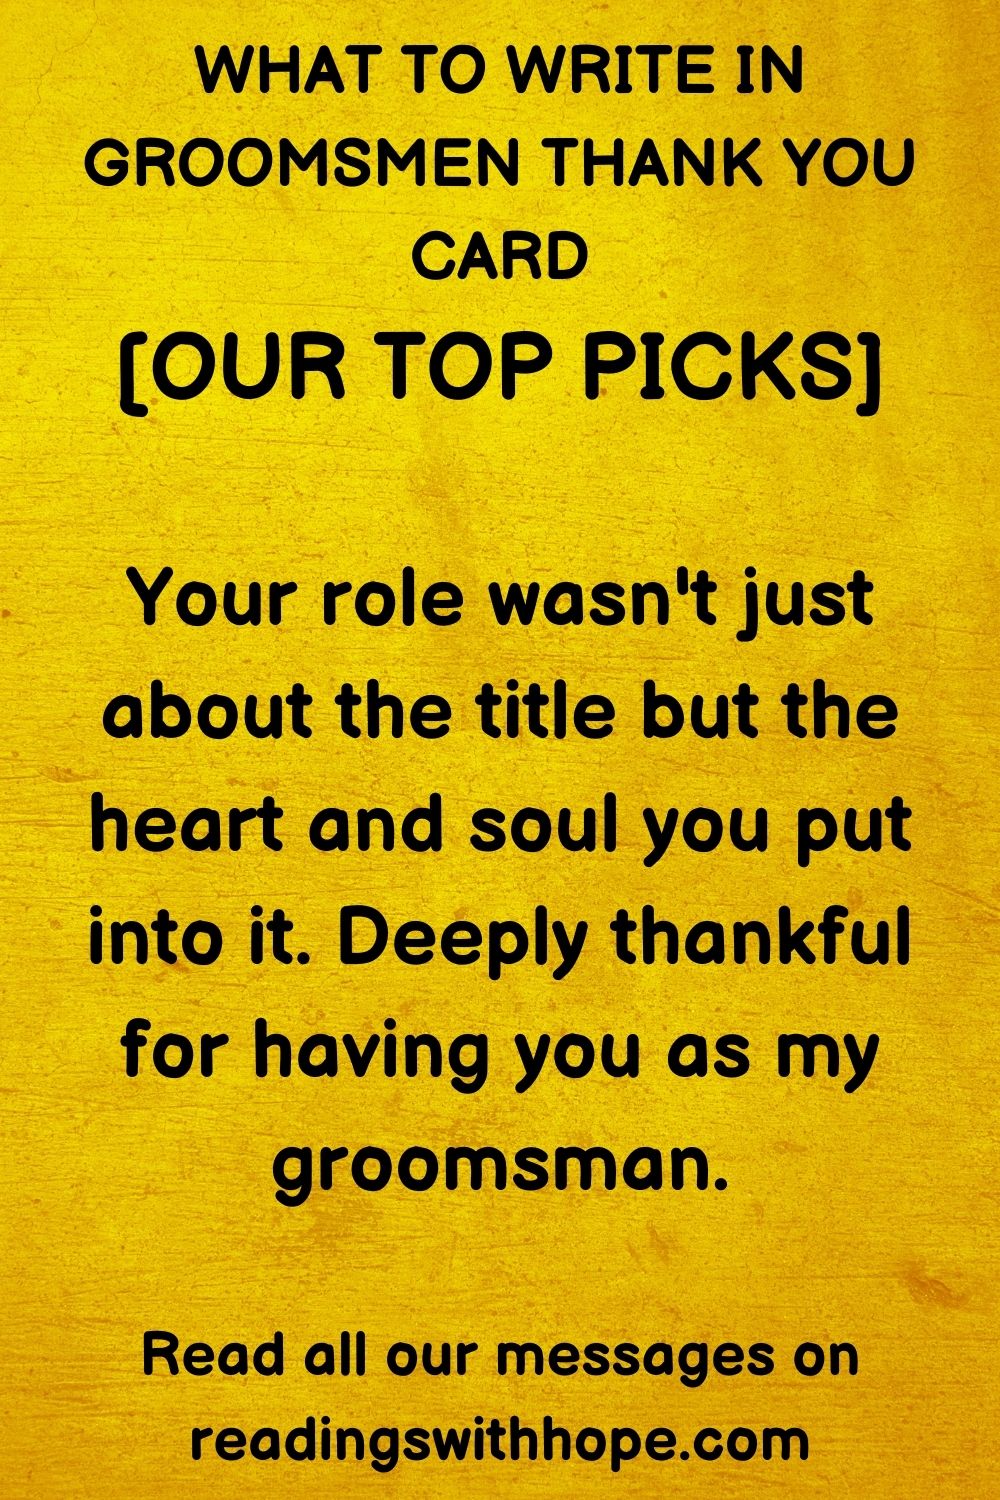 What to Write in Groomsmen Thank You Card